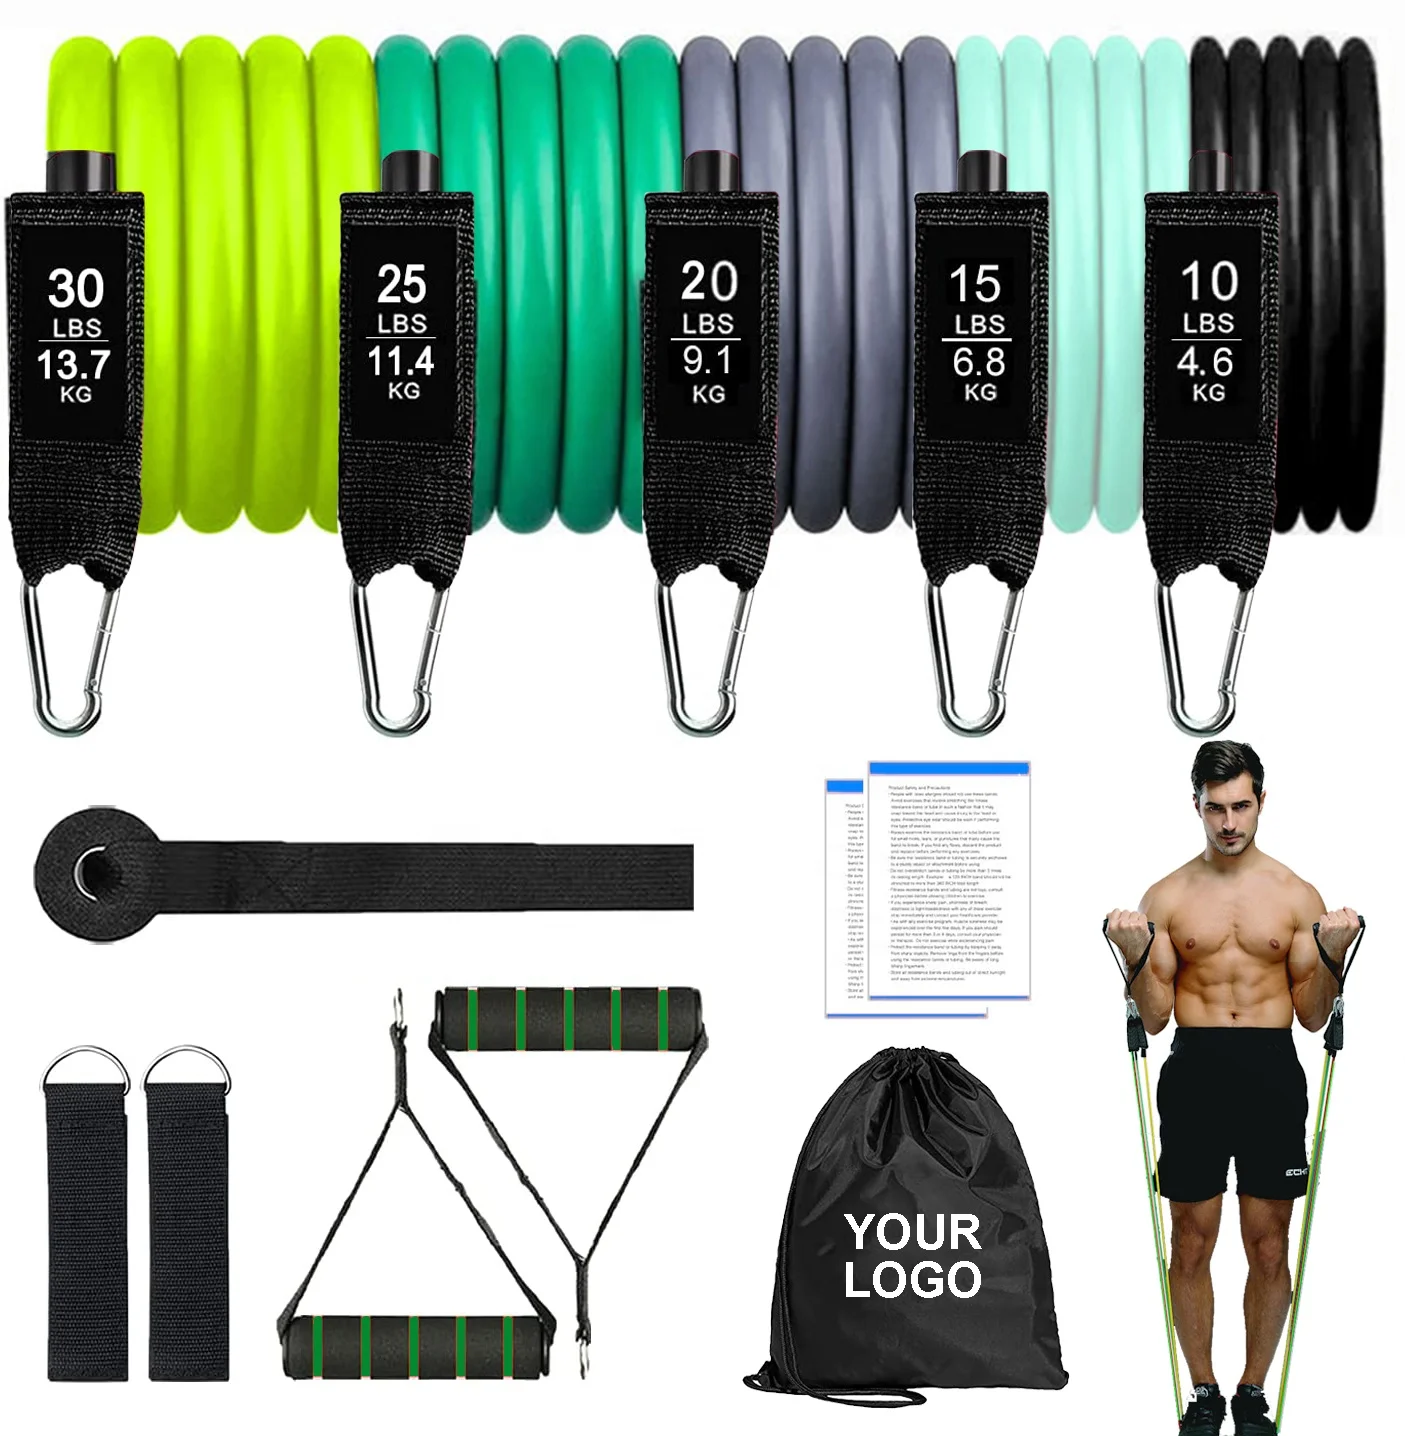 

Amazon Hot Sale 150lb 13pcs OEM ODM Latex TPE Strength Bodybuilding Men Muscles Pull Up Resistance Ankle Tube Tubing Bands Set, Green+cyan+gray+blue+black